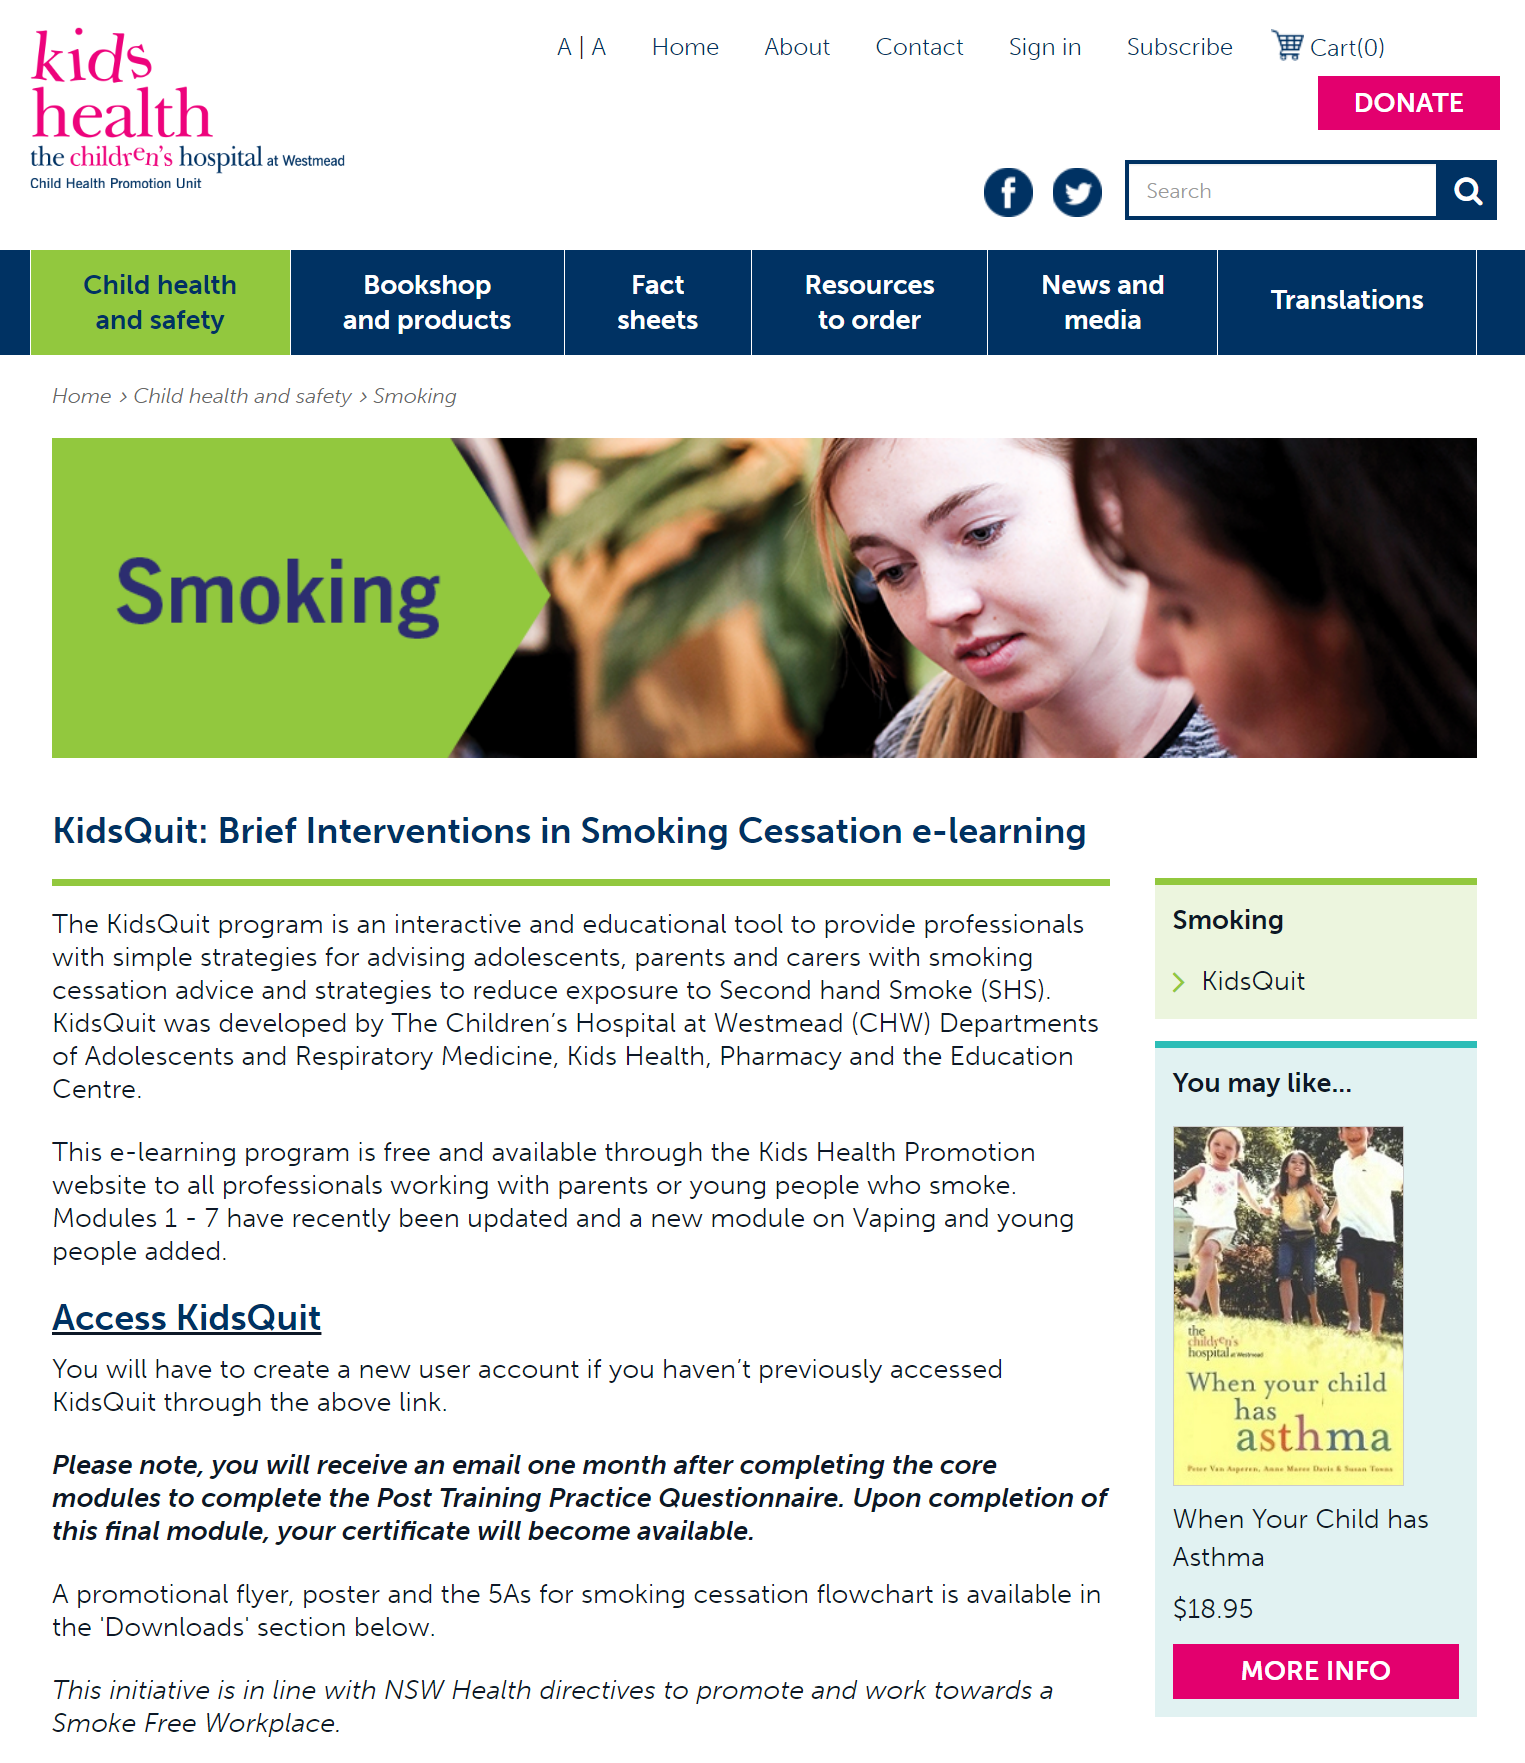 Screenshot of KidsQuit: Brief Interventions in Smoking Cessation e-learning